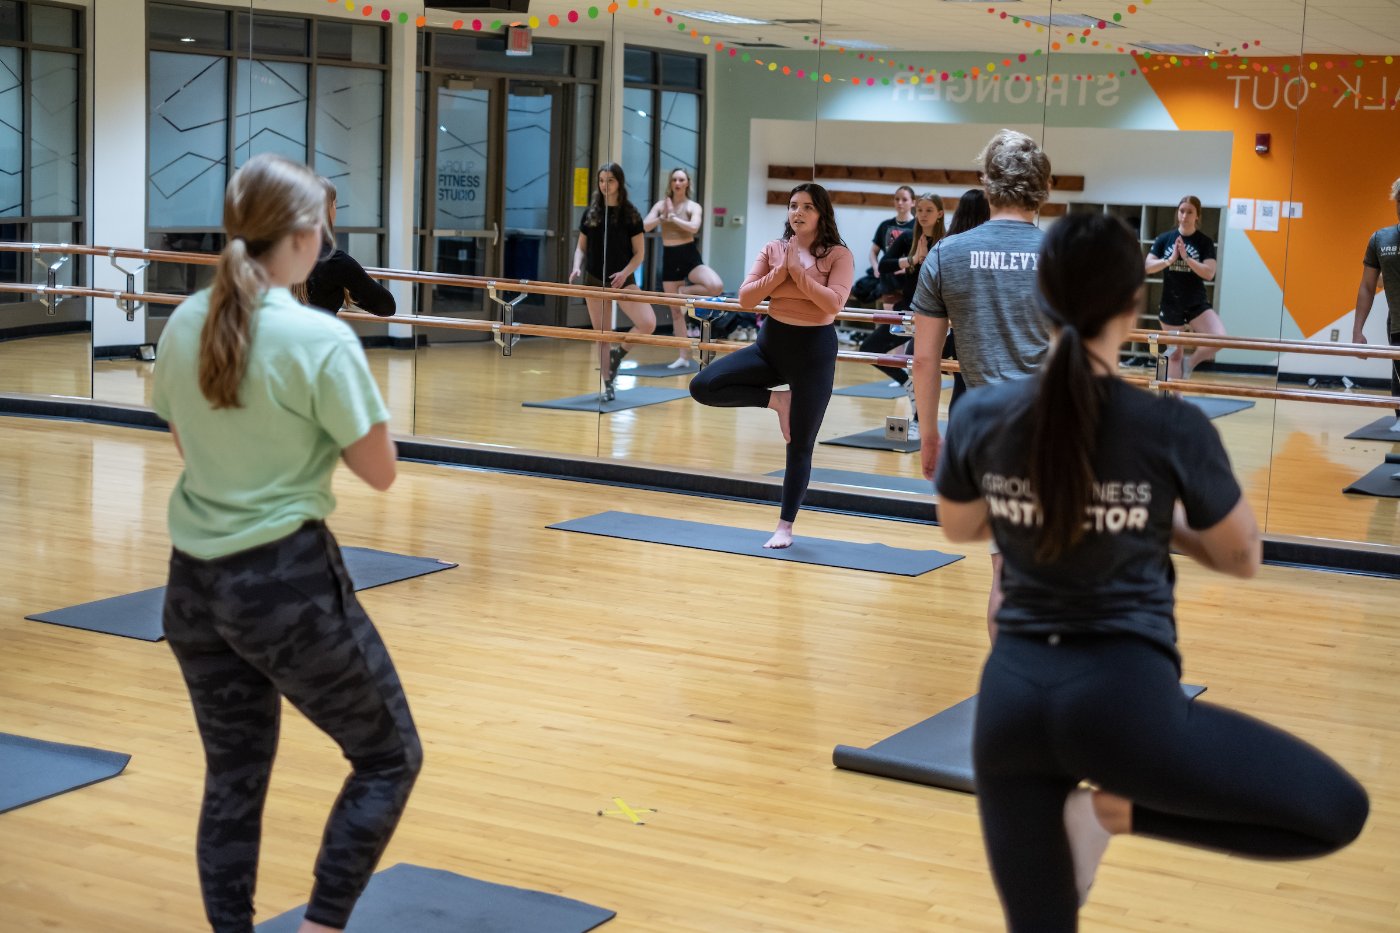 PAST EVENT] Free Outdoor Yoga Class - Campus Recreation Events